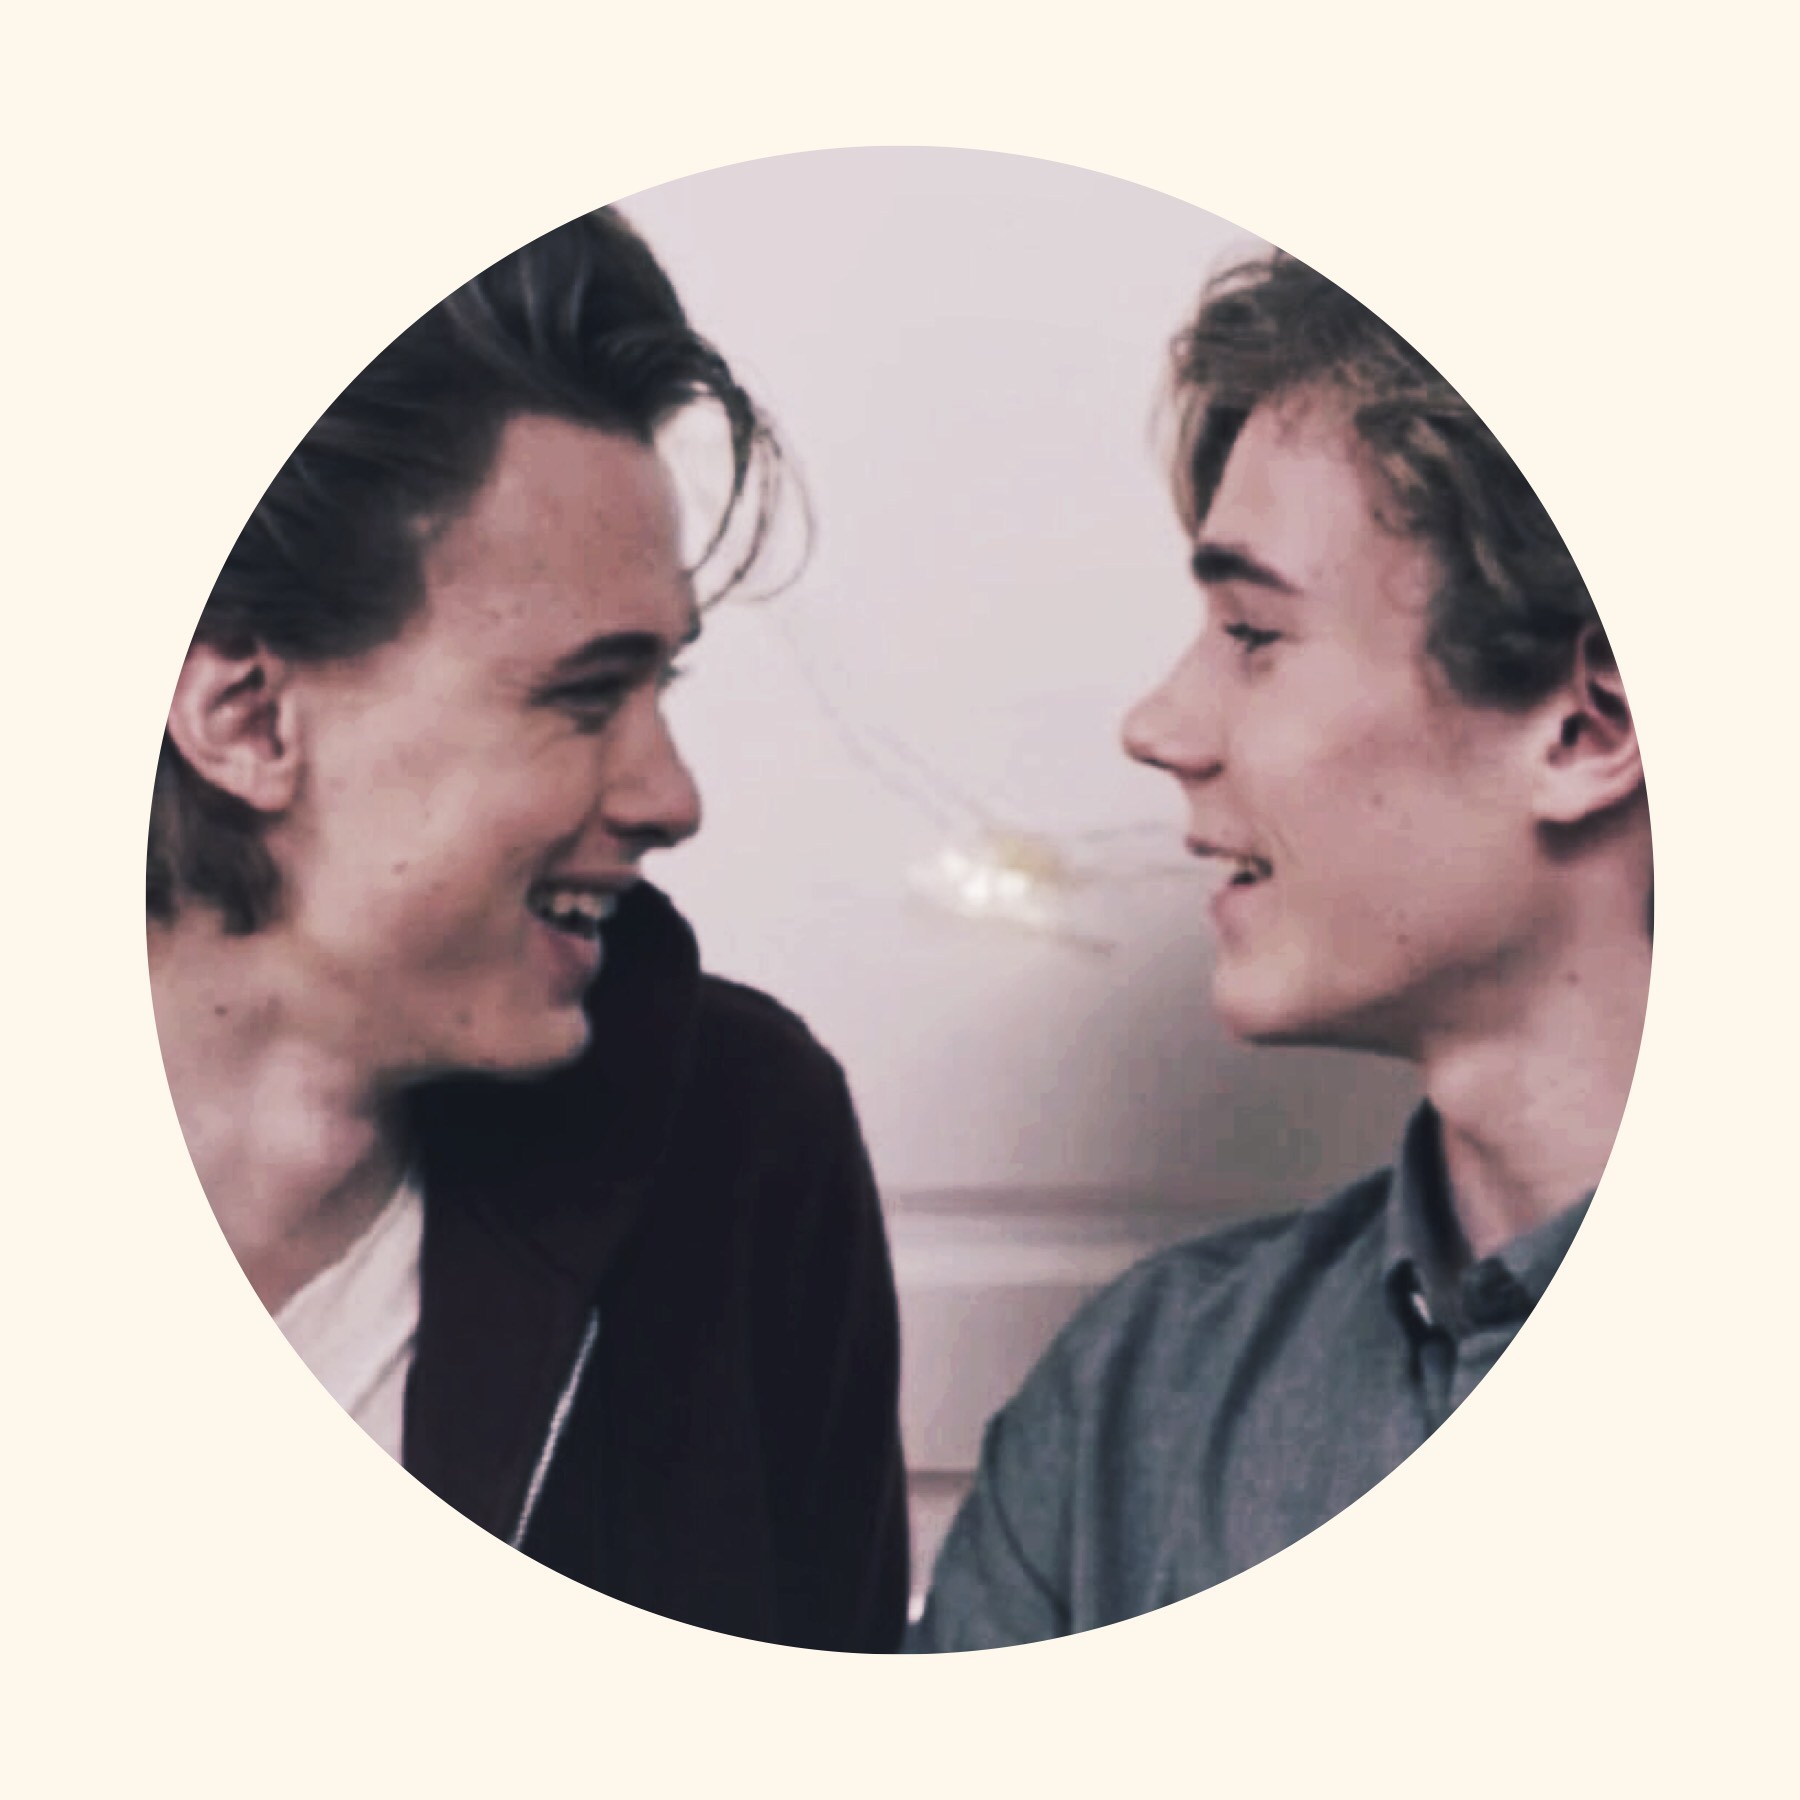 sometimes I’ll just look at a picture of Isak and Even and my heart goes💙💗❤️💞💕💙n I tear up a bit bc they’re so godámń pure and wonderful😭😭u know